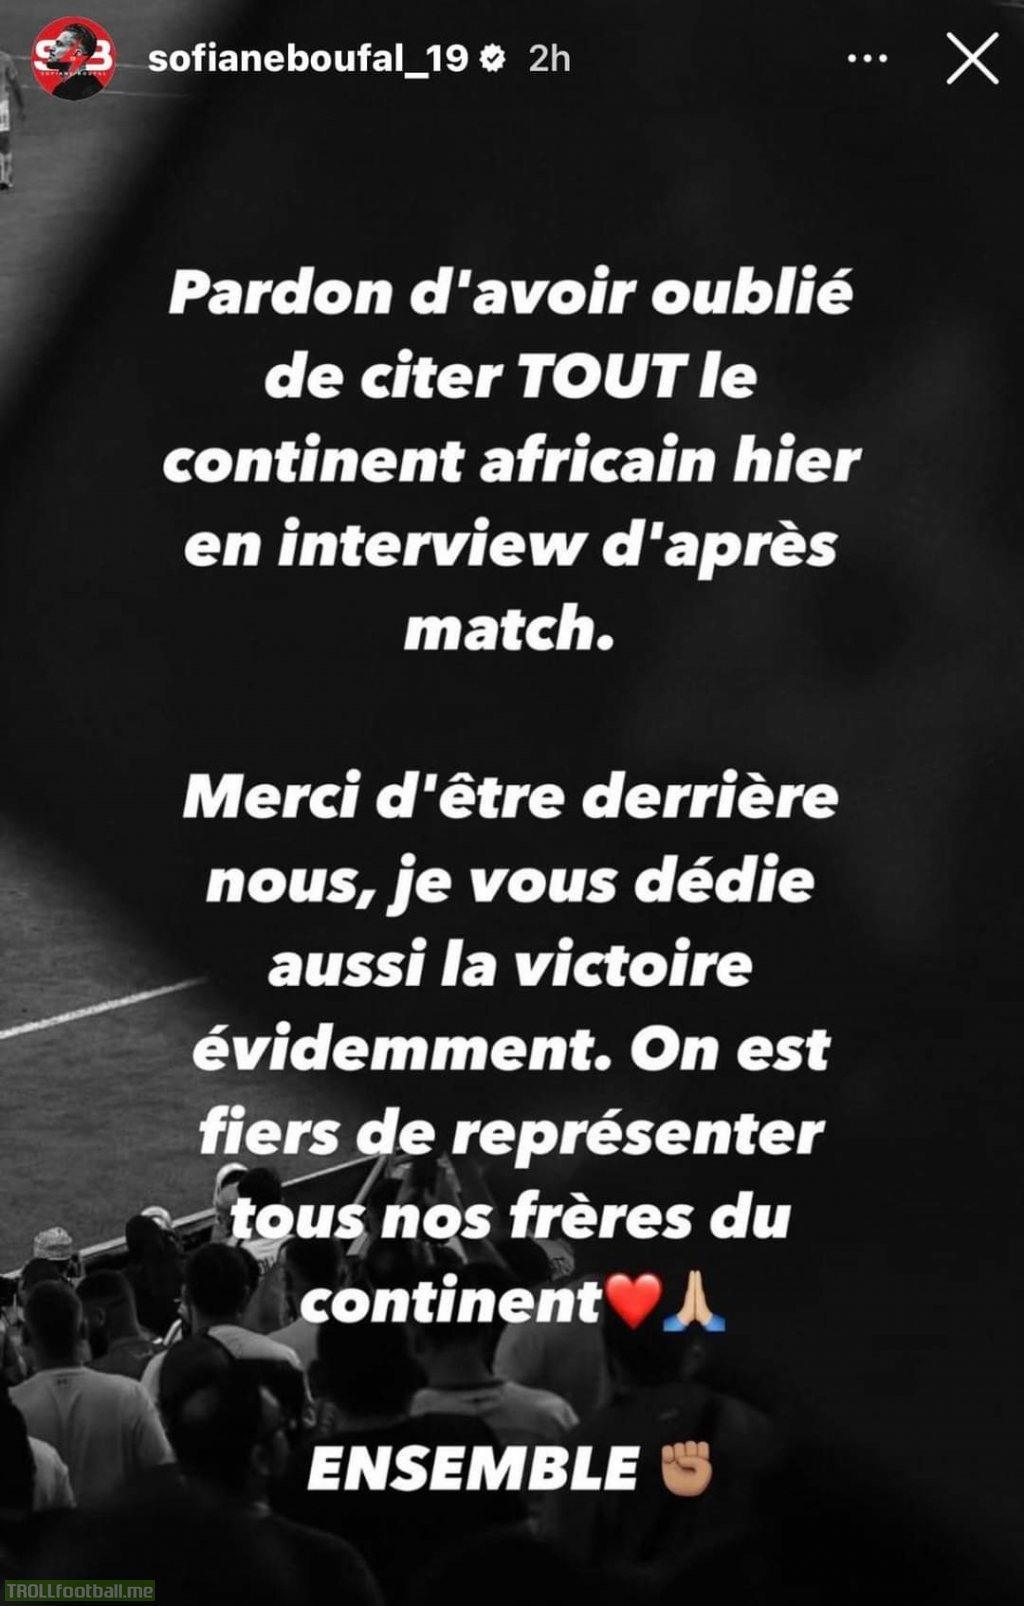 [Sofiane Boufal]: "I apologize for not mentioning the whole african continent yesterday at the interview. Thank you for being there for us, I dedicate this win for you too. We are so proud to represent all our brothers from this continent"